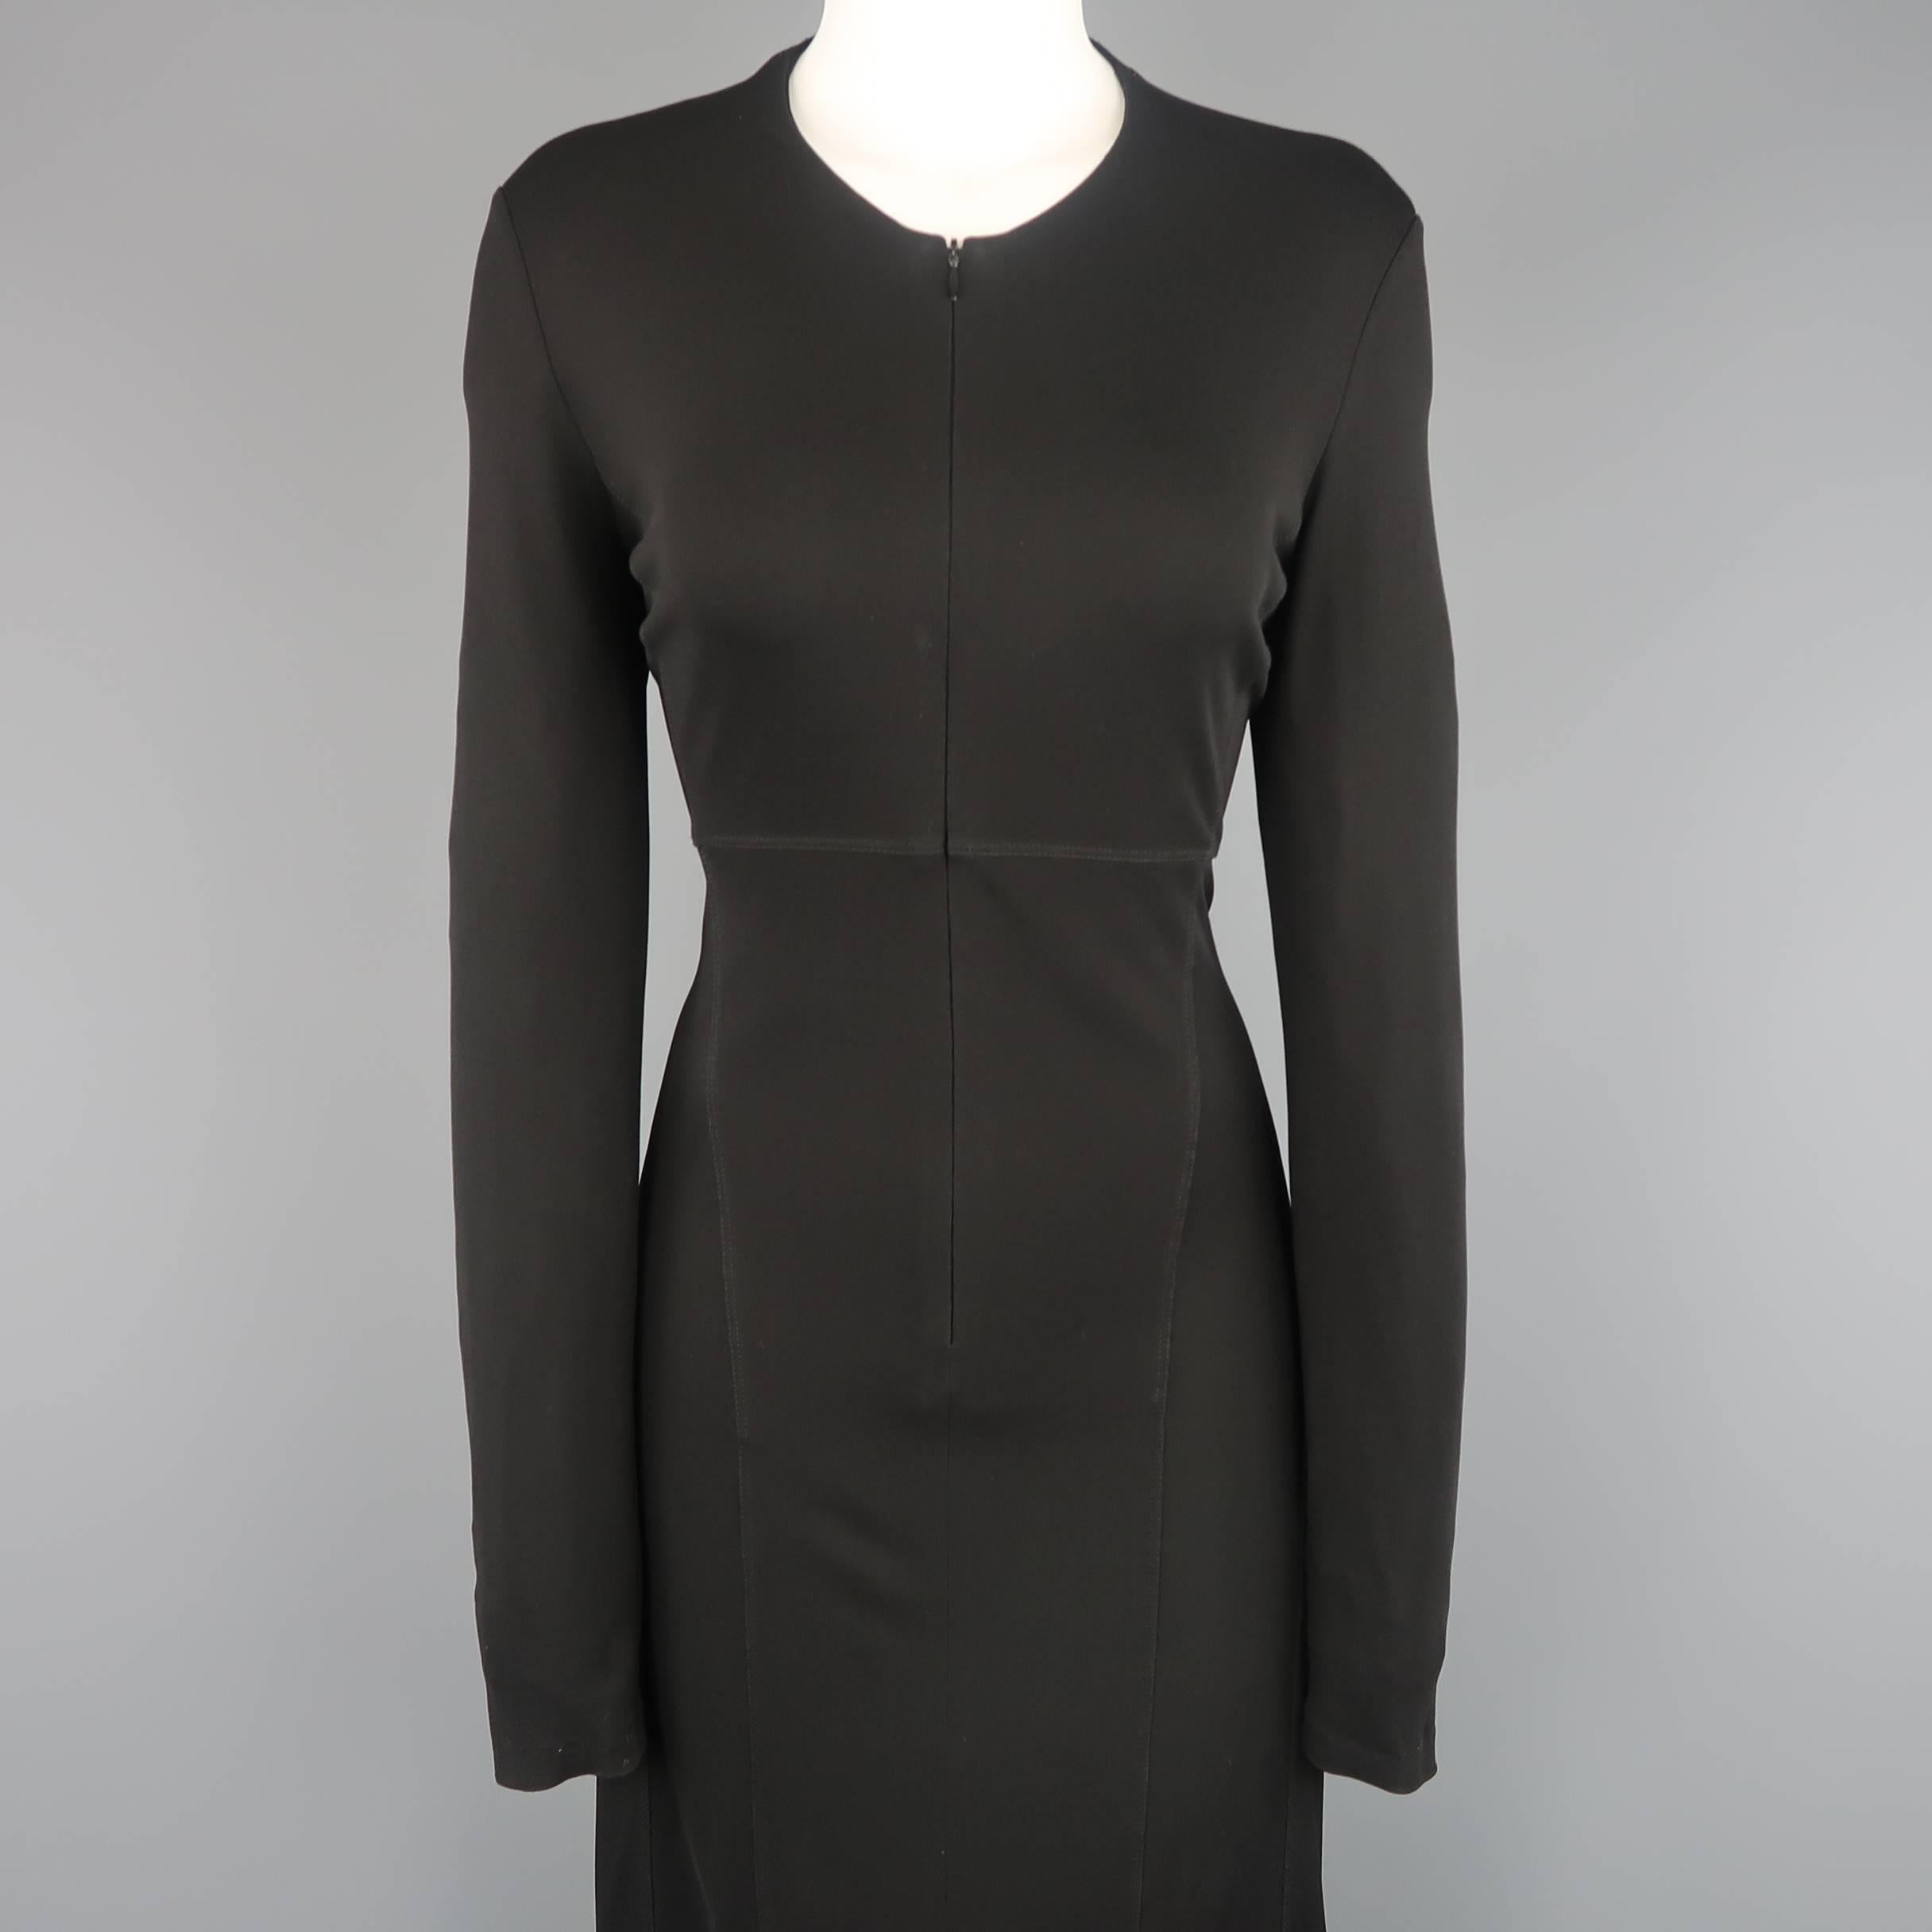 Vintage CALVIN KLEIN maxi dress comes in black viscose and features a round neckline, hidden zip up front, long sleeves, and decorative contour seams. Made in Italy.
 
Good Pre-Owned Condition.
Marked: 8
 
Measurements:
 
Shoulder: 16 in.
Bust: 36